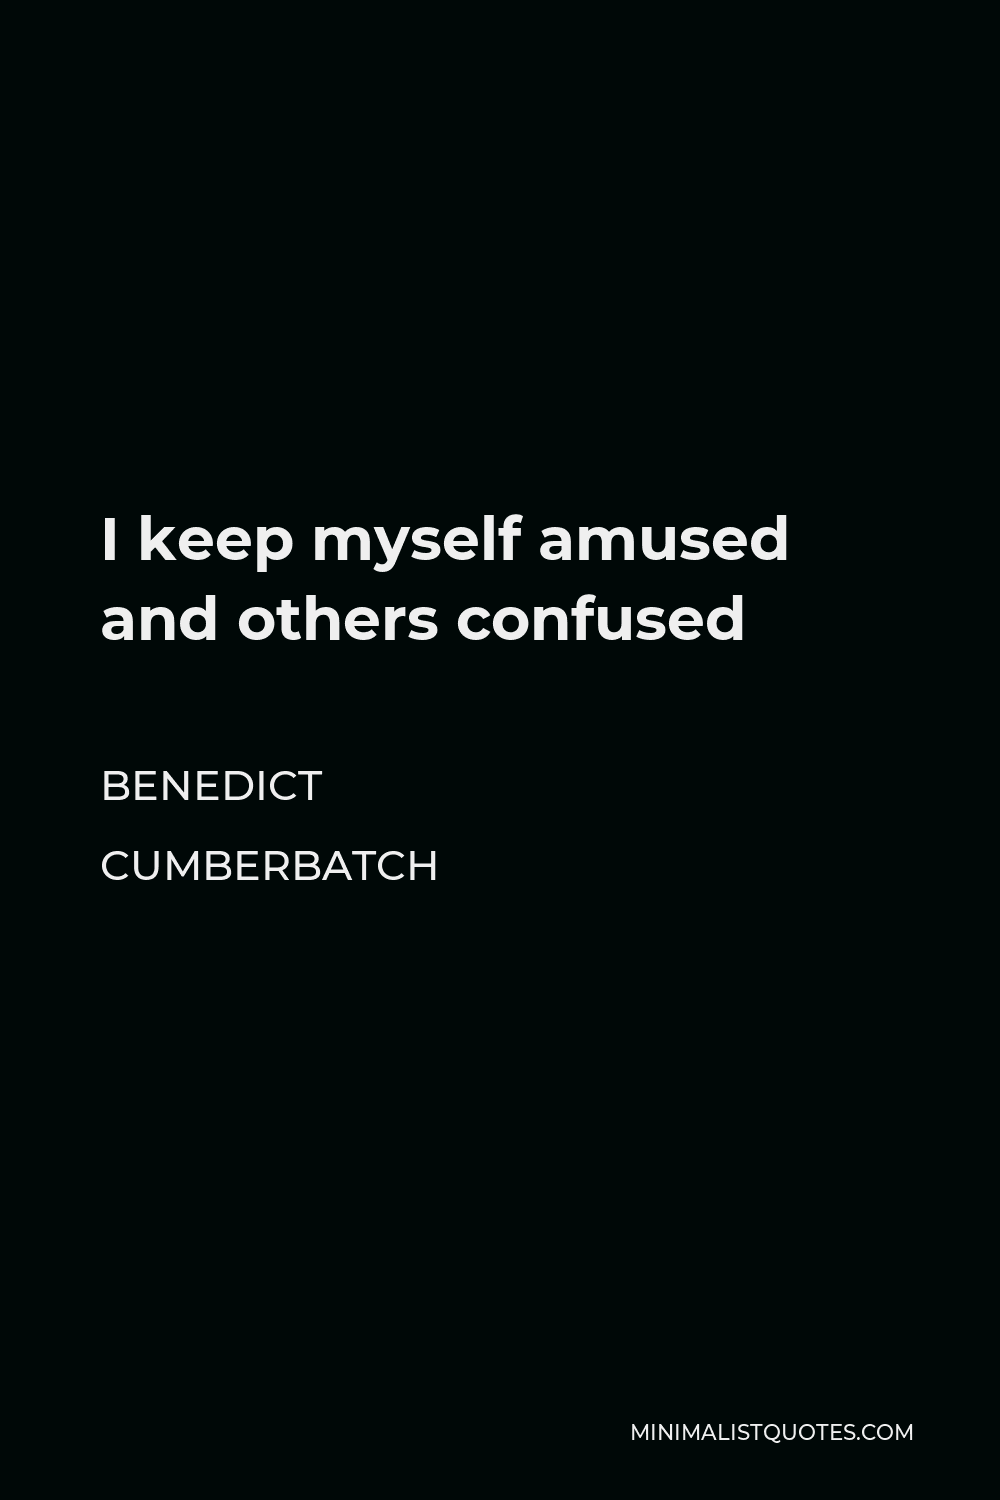 Benedict Cumberbatch Quote - I keep myself amused and others confused